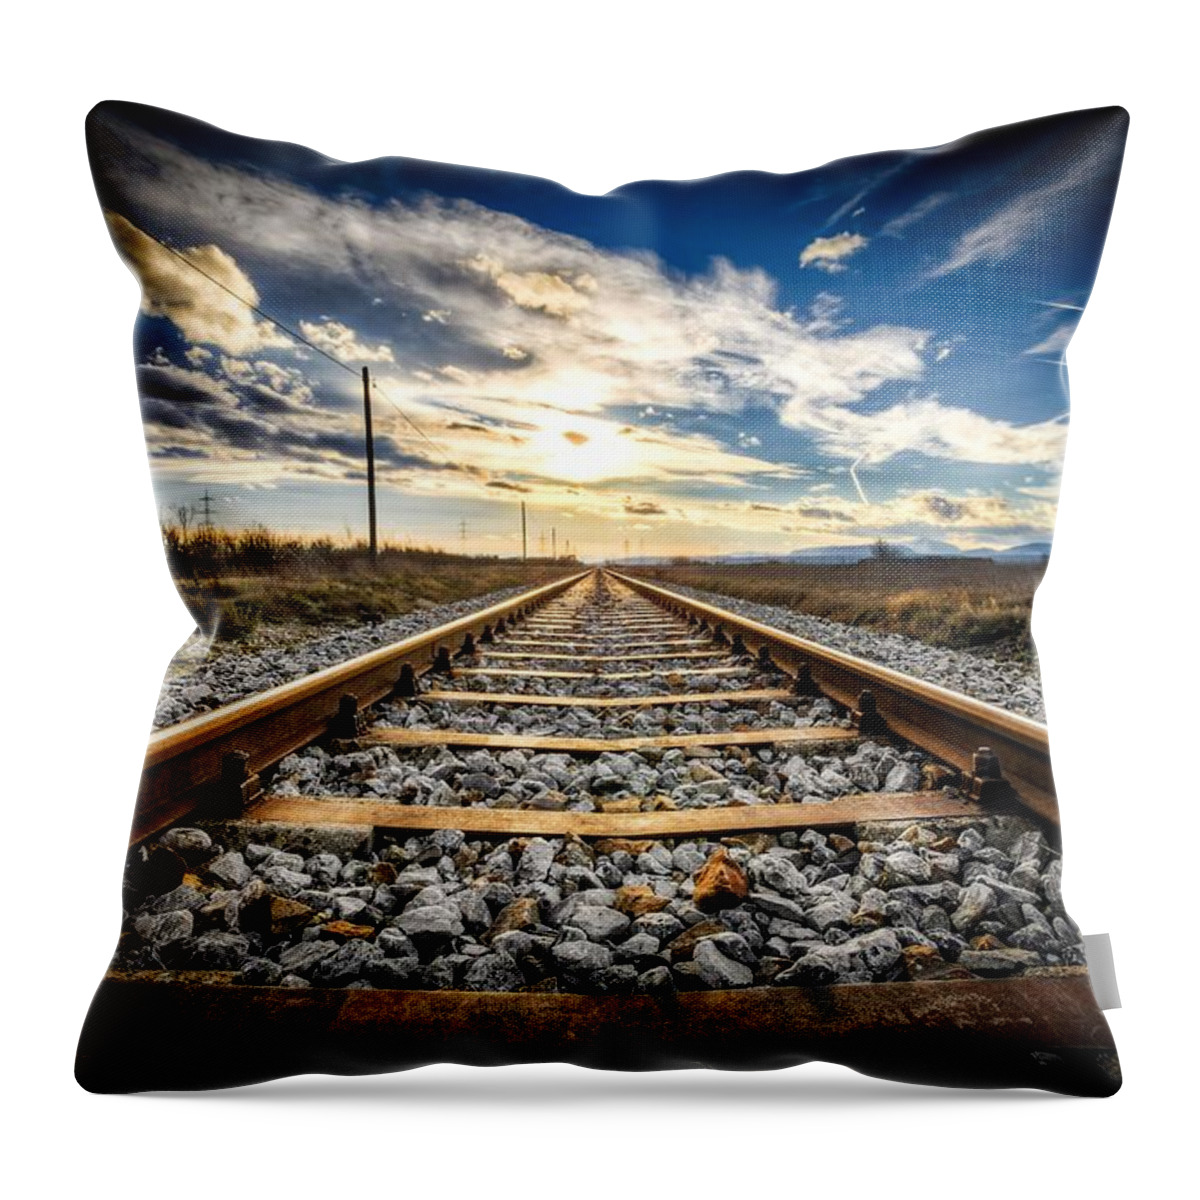 Tracks Throw Pillow featuring the digital art Down The Tracks by Michael Damiani